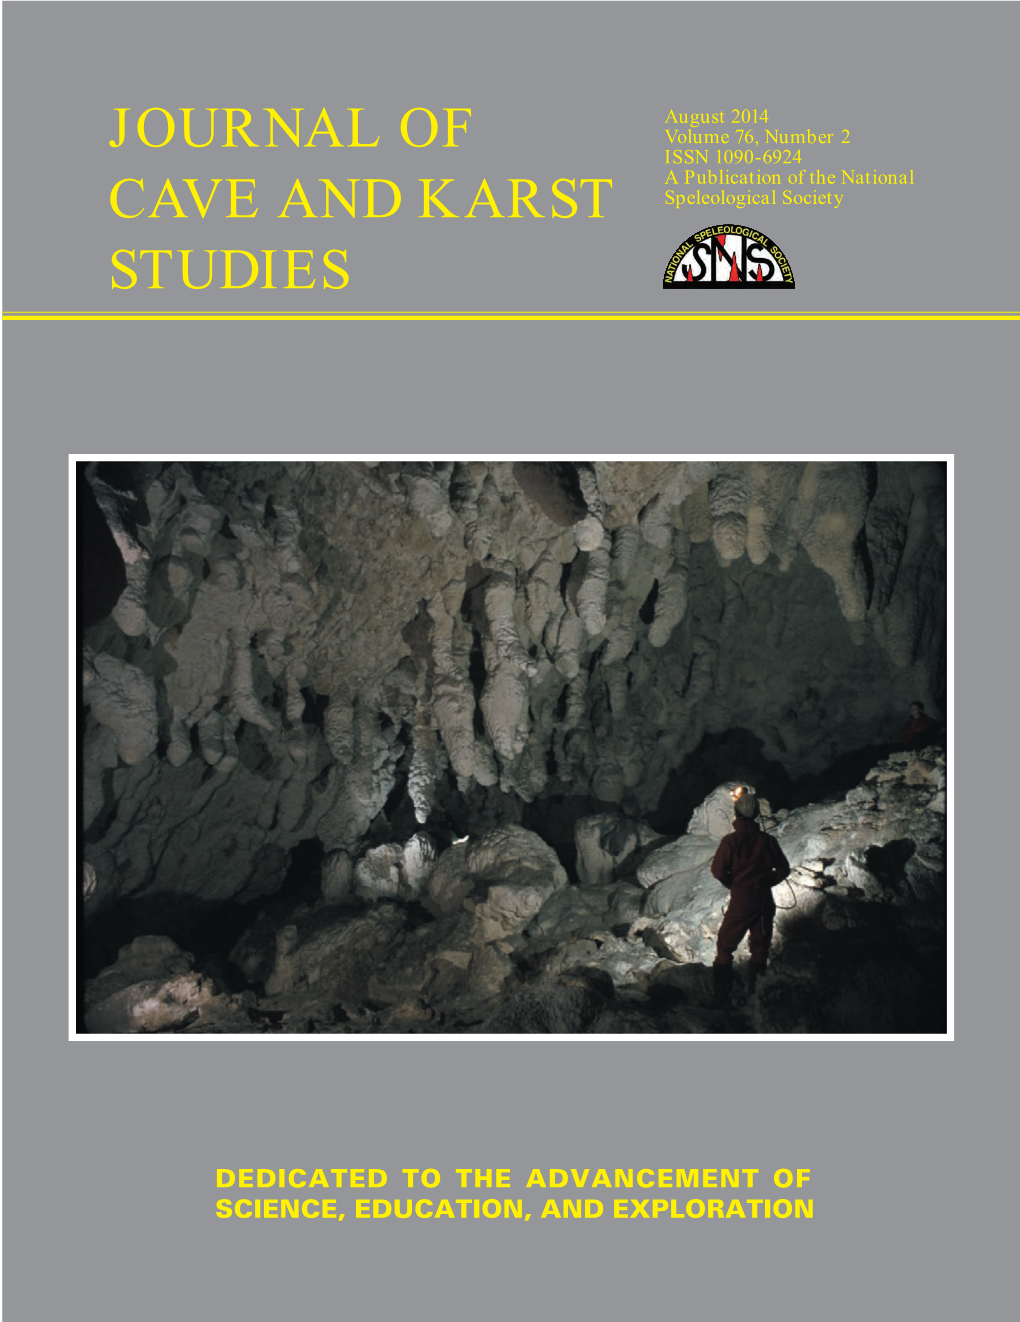 Journal of Cave and Karst Studies Volume 76 Number 2 August 2014 69 88 154 104 114 127 139 146